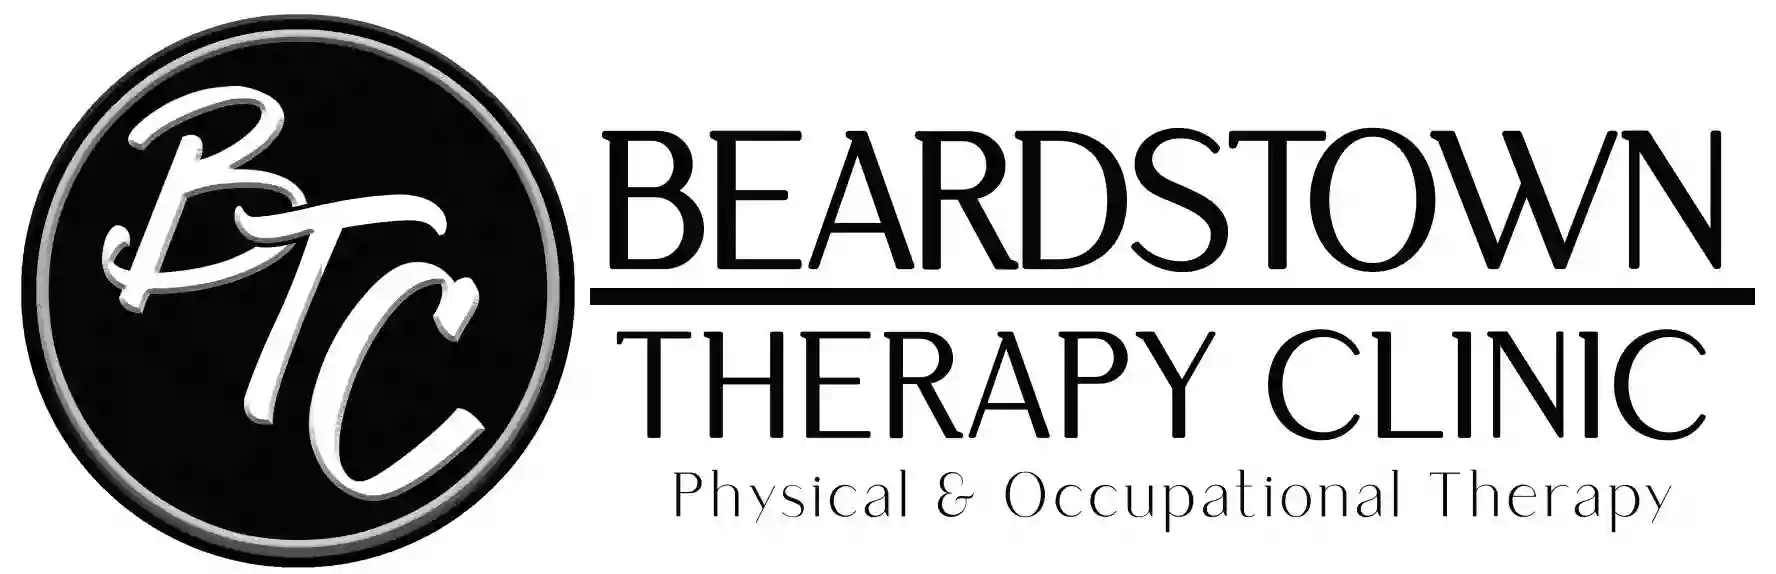 Beardstown Therapy Clinic